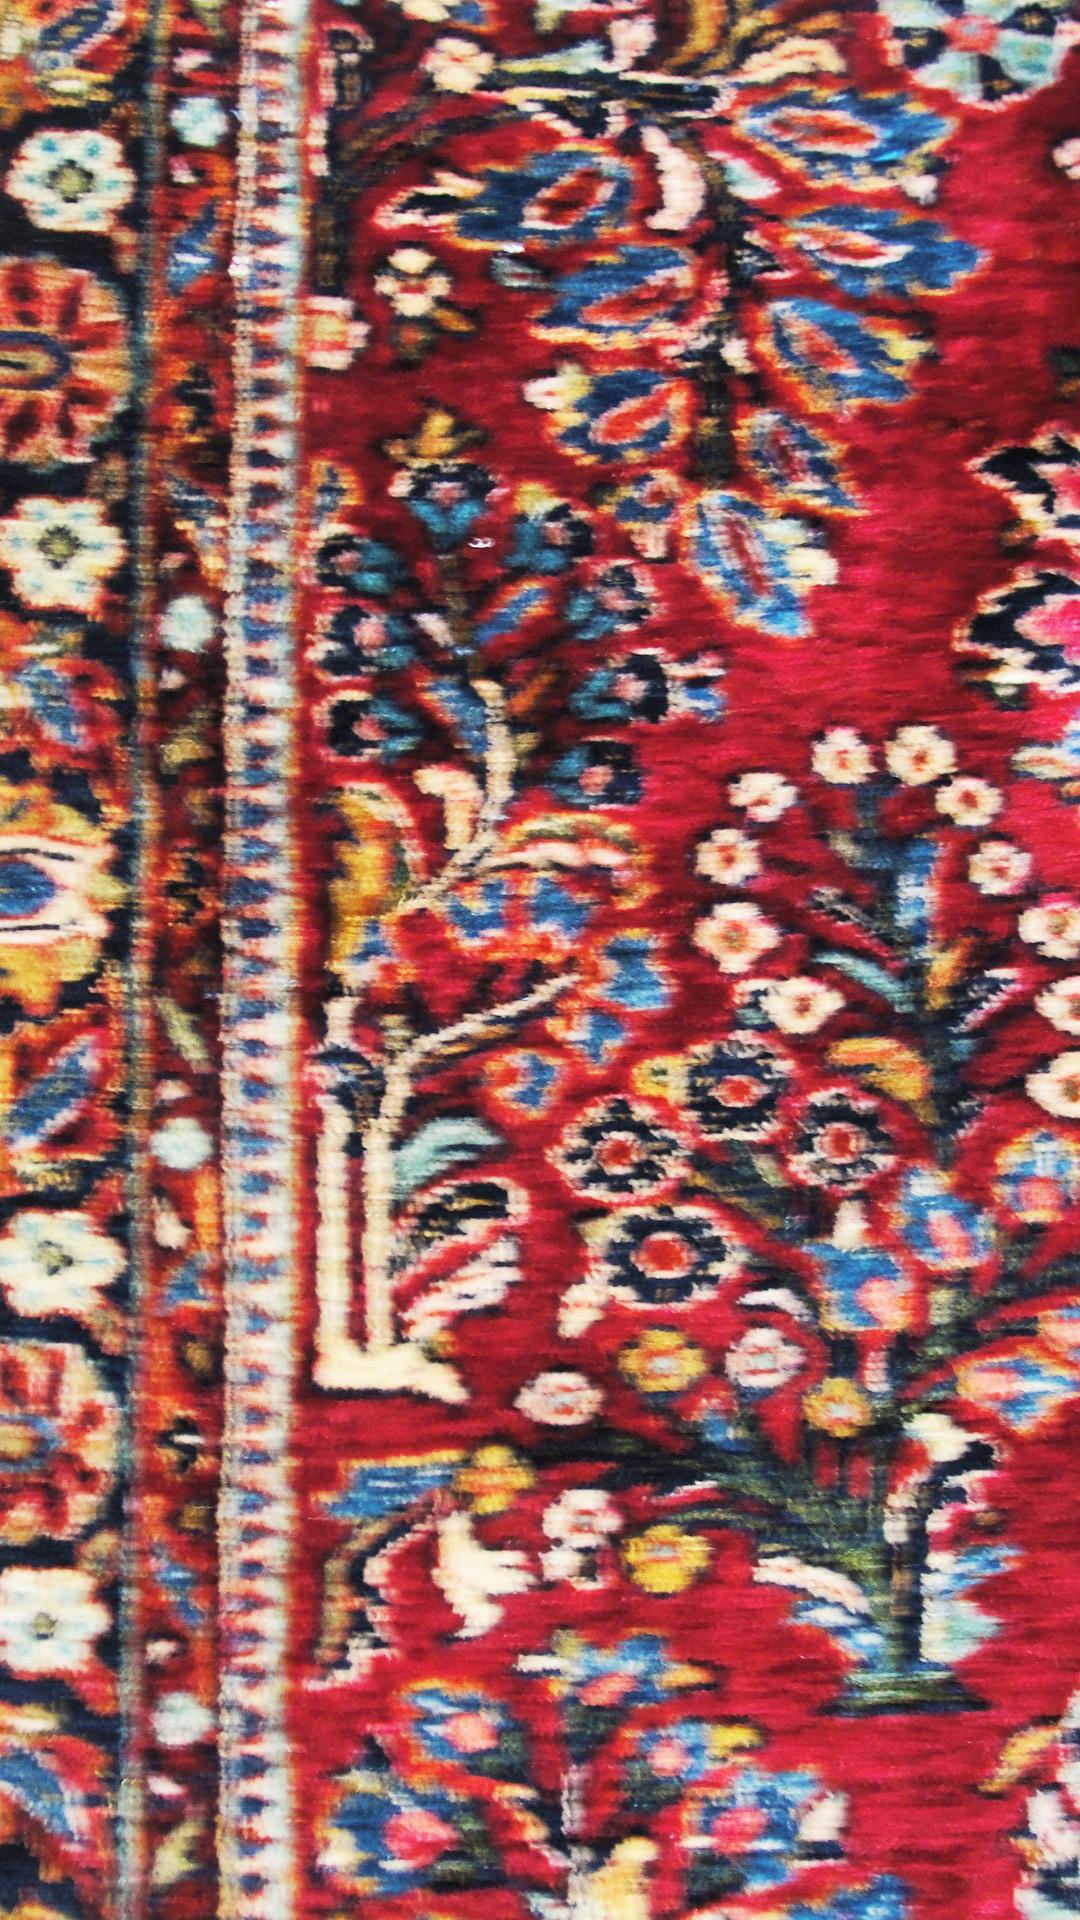 Antique Persian Sarouk Rug, c-1930's, Red and blue, floral design In Excellent Condition For Sale In Evanston, IL